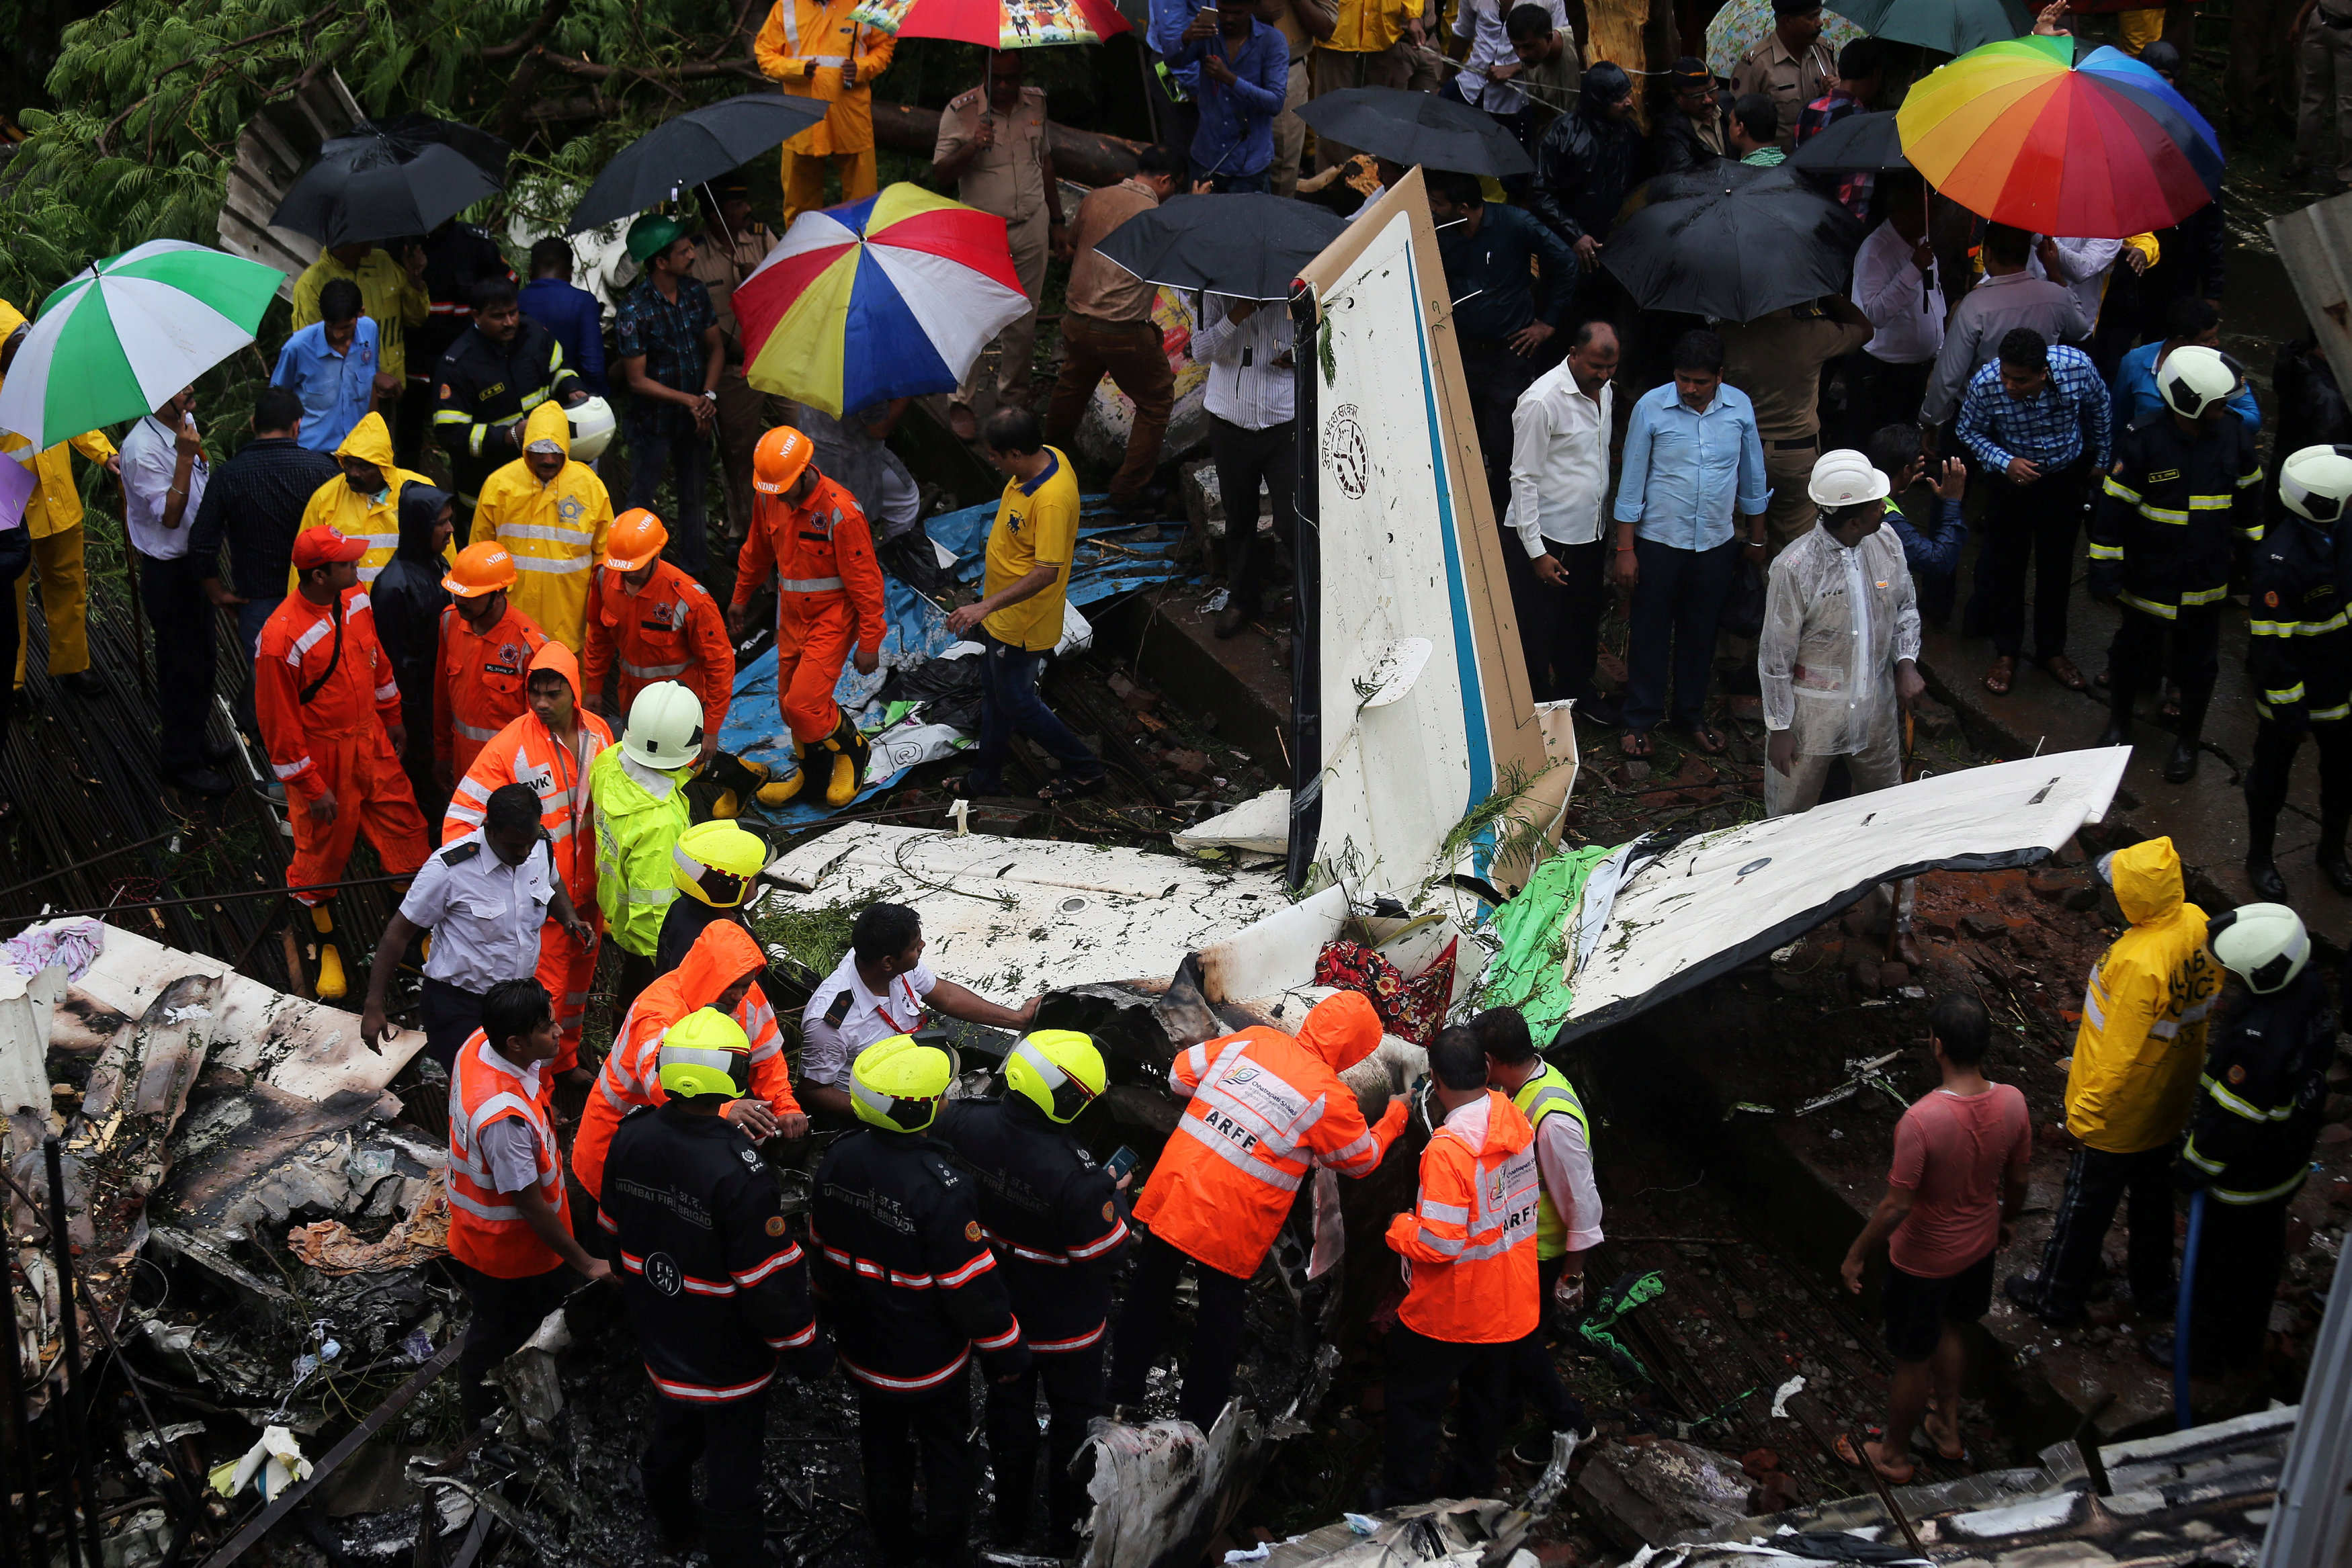 Firefighters and aircraft rescue workers inspect the site of a plane crash in Mumbai, India June 28, 2018. PHOTO: REUTERS